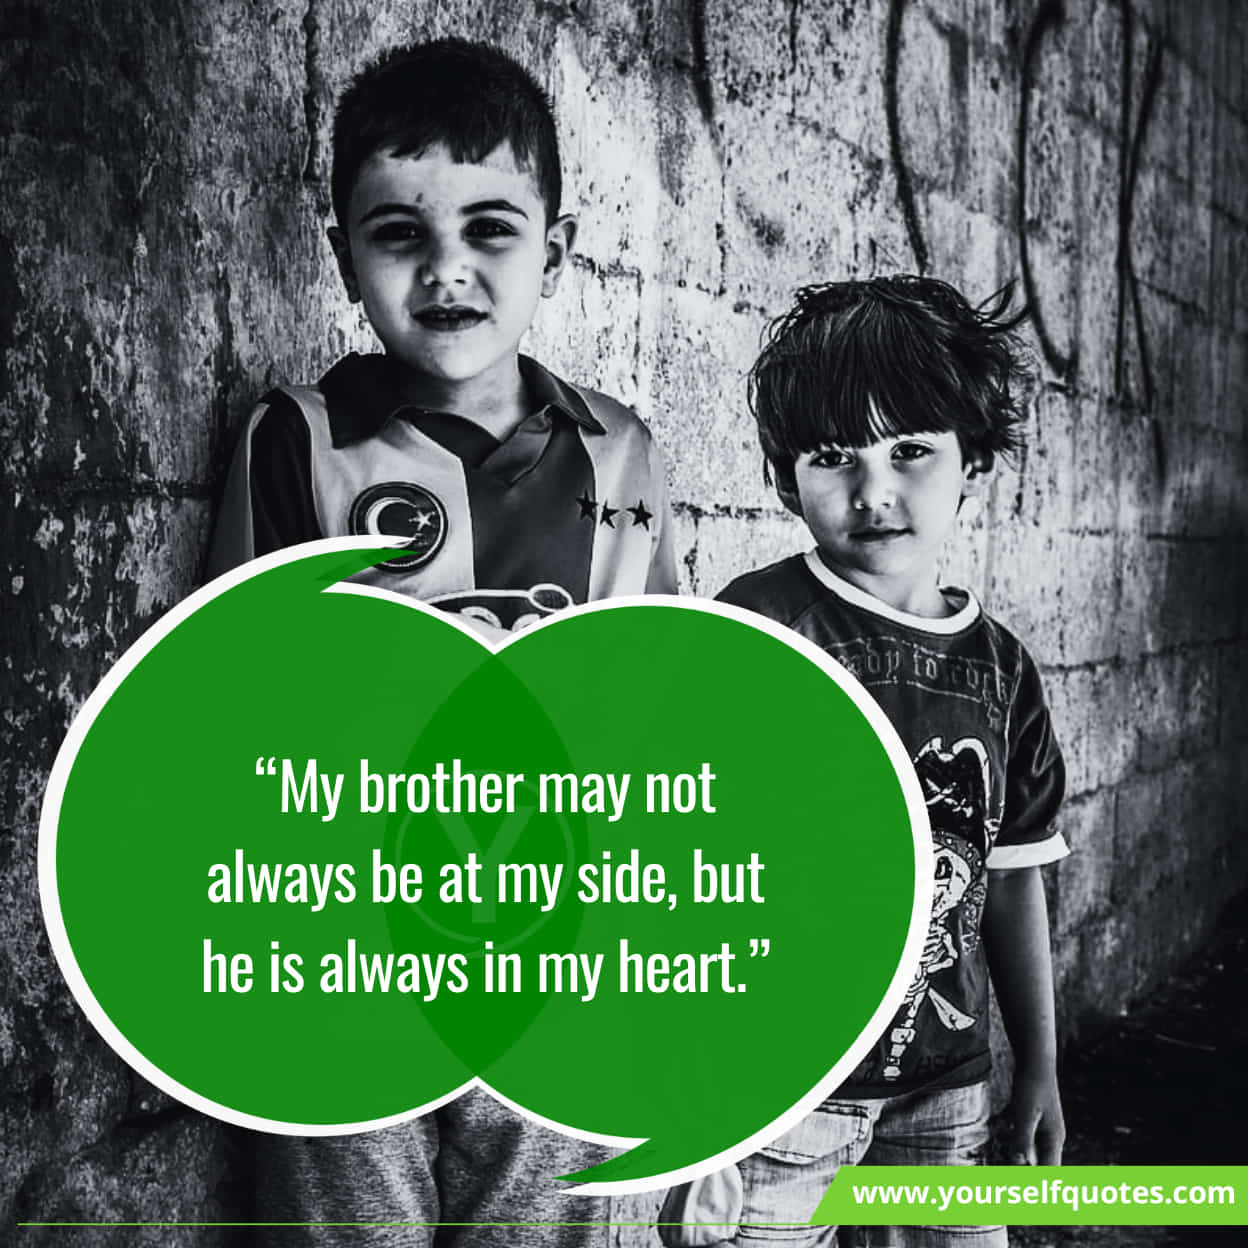 Motivational Quotes On Brother